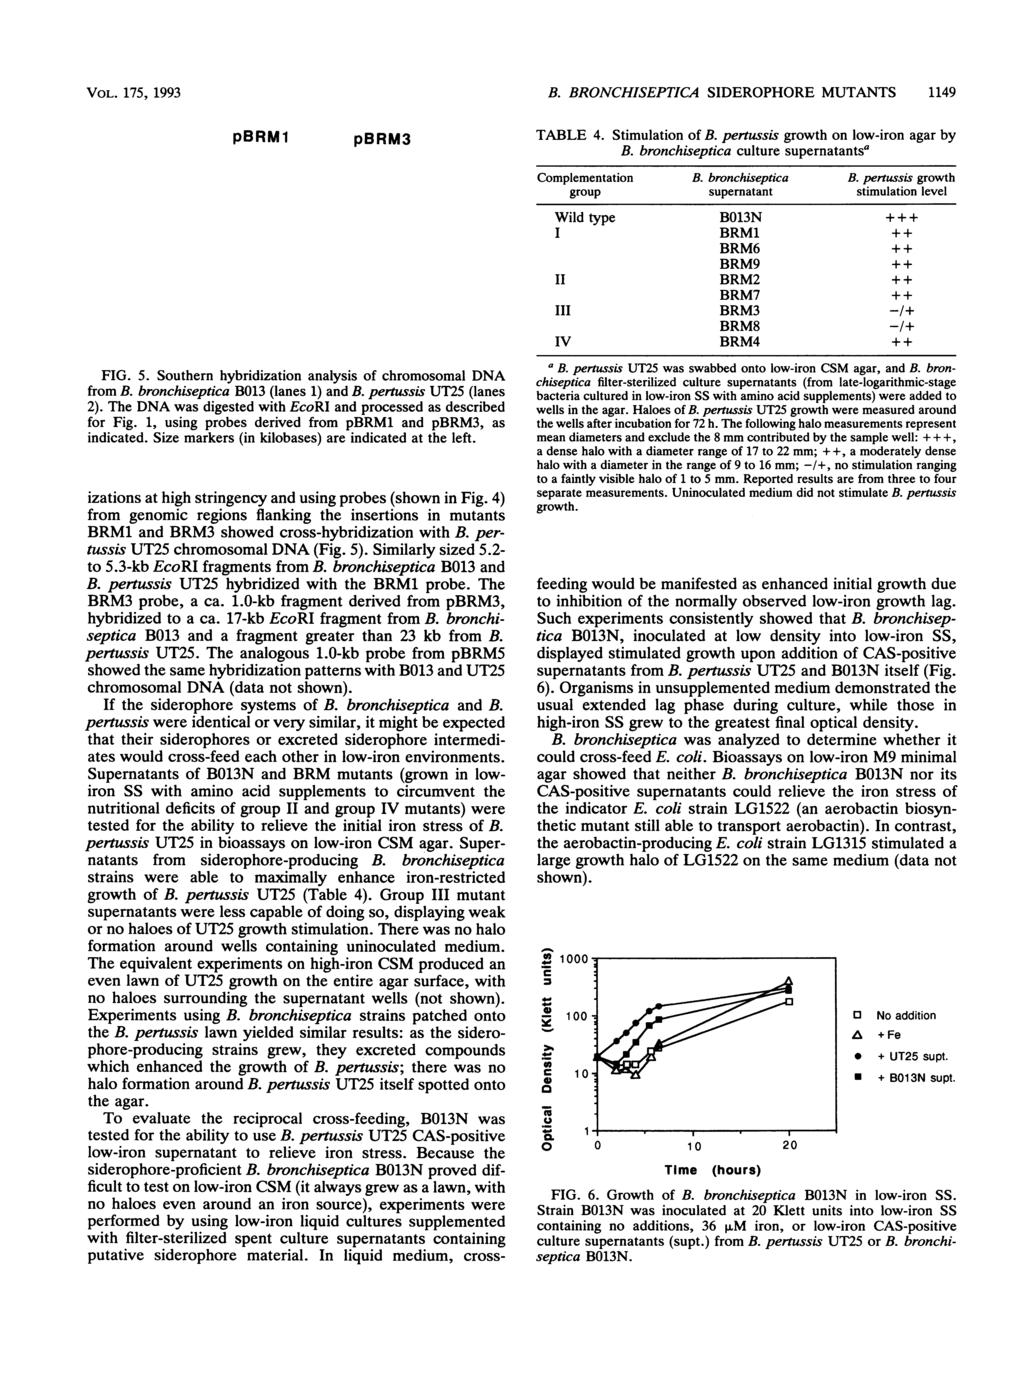 VOL. 175, 1993 2 3-9.4-6.7-4.4- pbrm1 1 2 pbrm3 1 2 FIG. 5. Southern hybridization analysis of chromosomal DNA from B. bronchiseptica B013 (lanes 1) and B. pertussis UT25 (lanes 2).